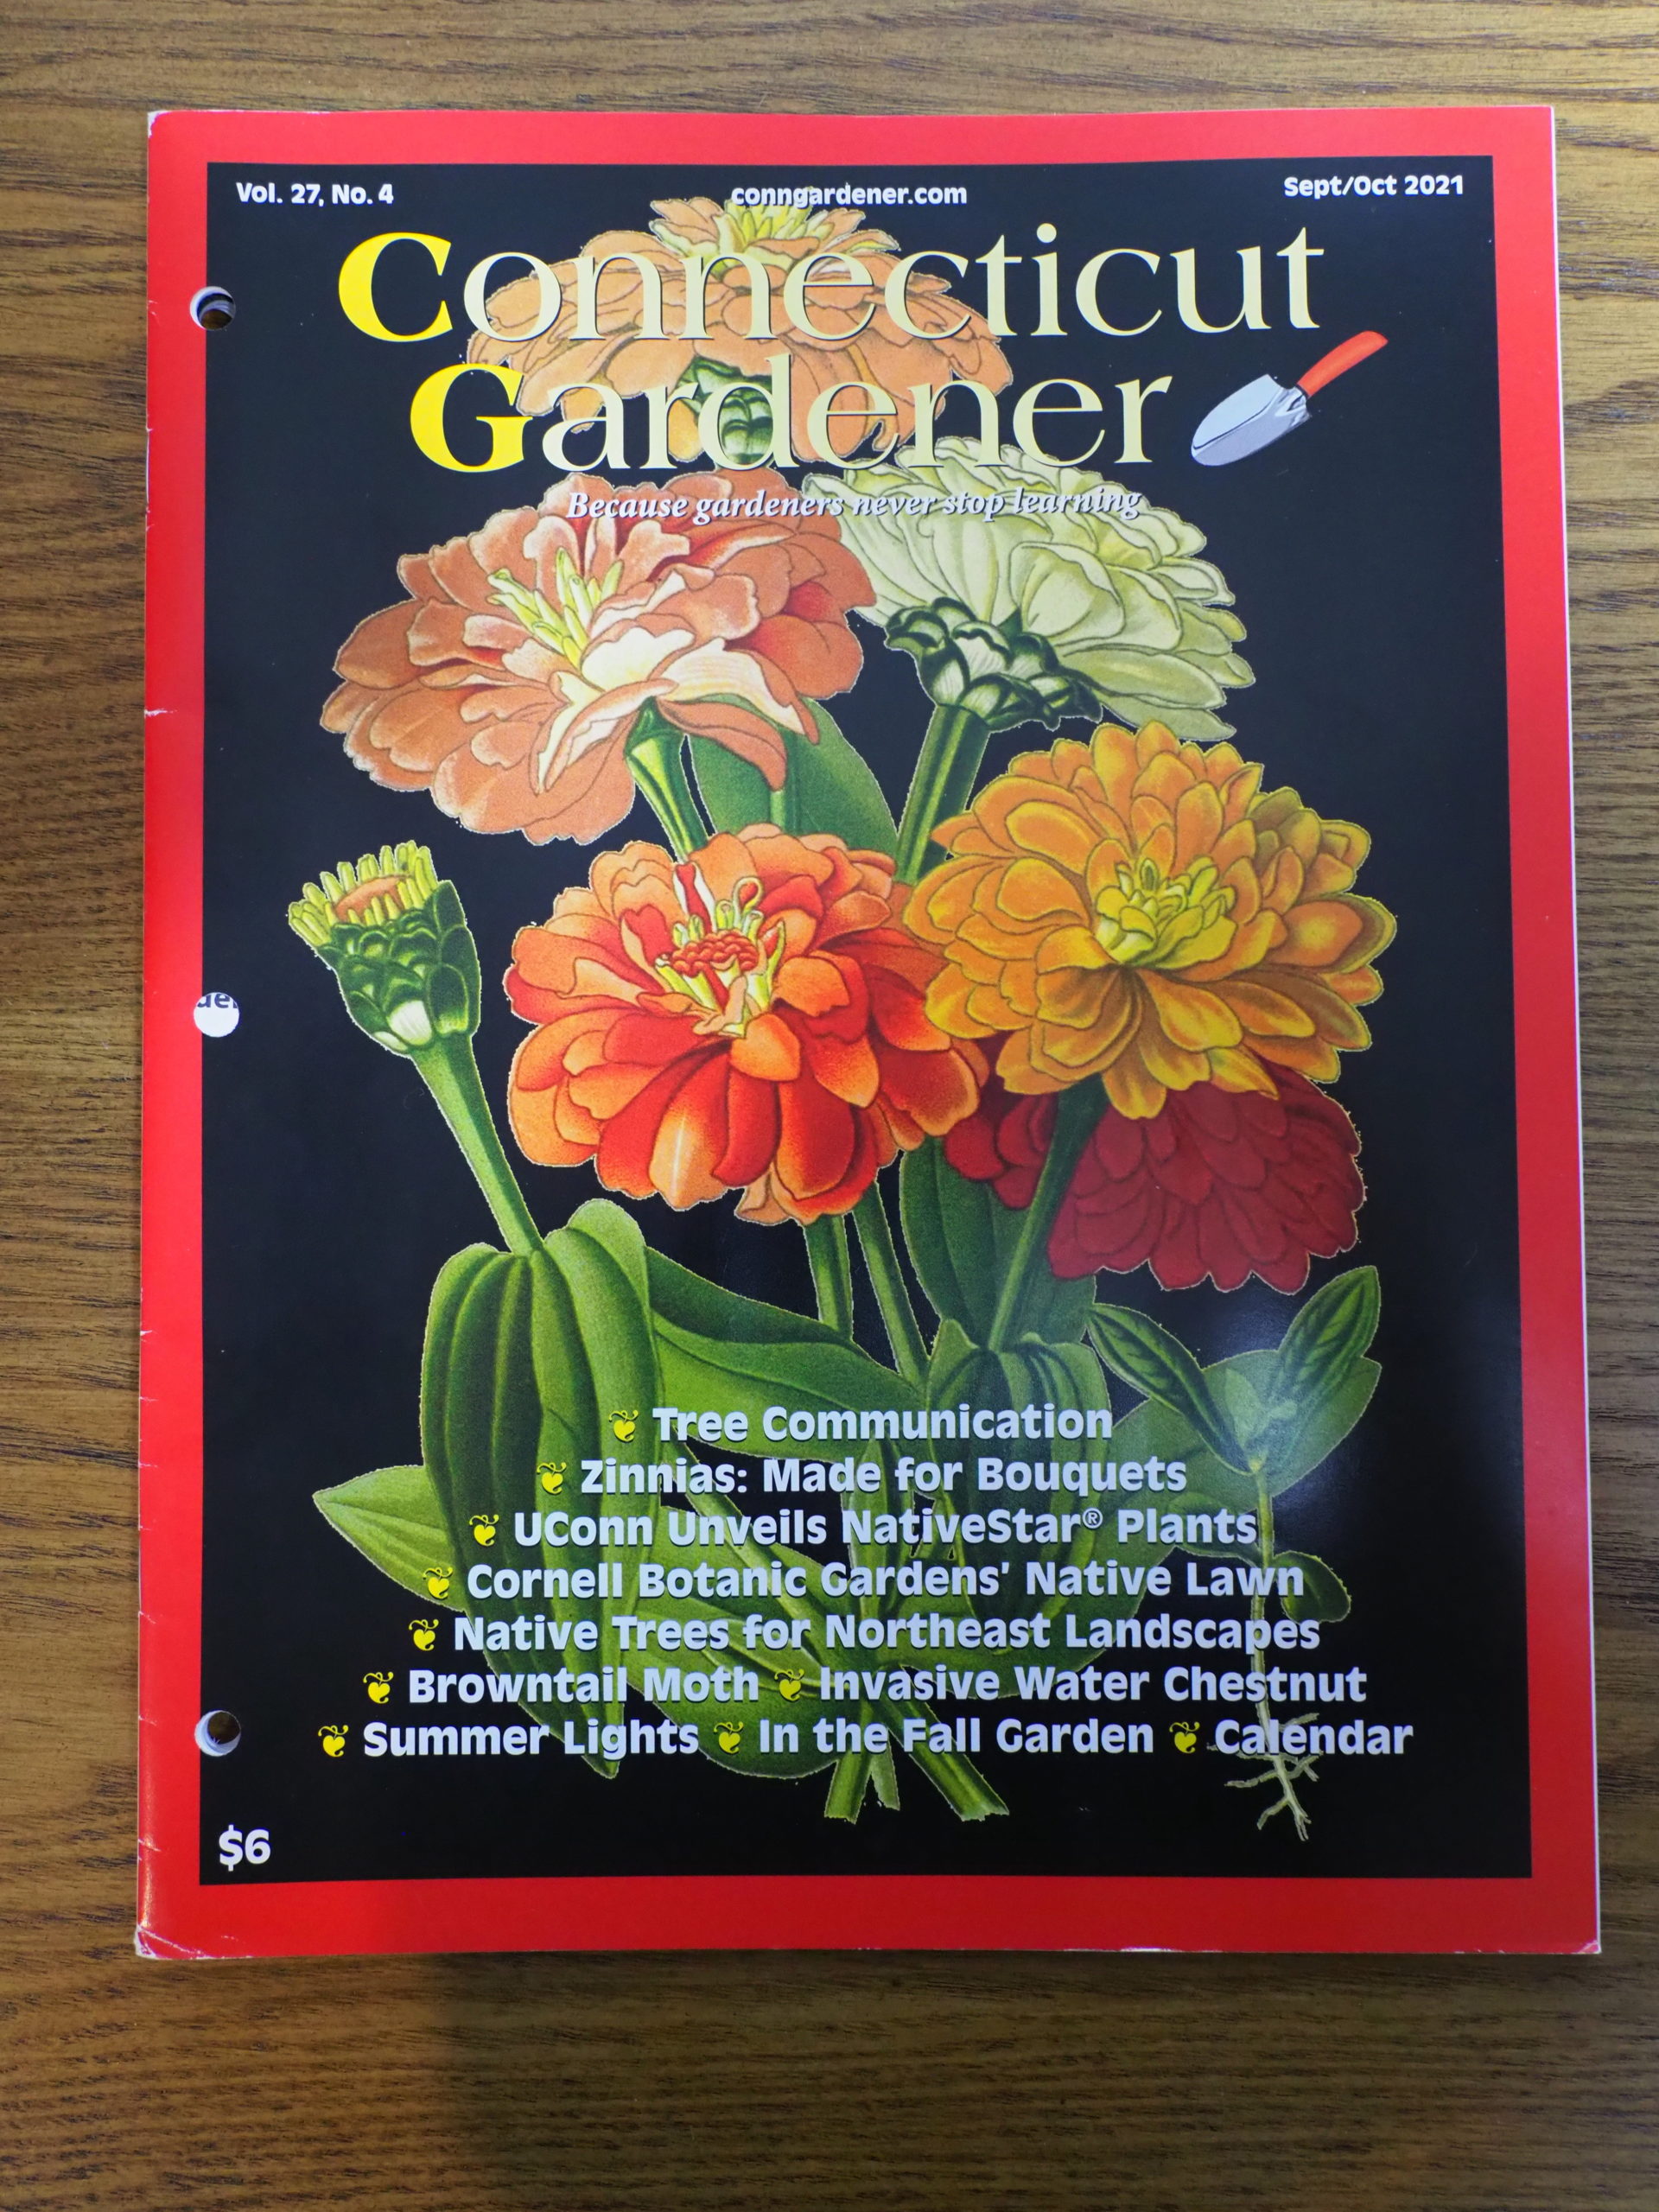 The Connecticut Gardener is totally relevant for East End gardeners and is one of the finest gardening magazines available. Note the quote under the name, “Because gardener’s never stop learning.” So very, very true. A great gift that will keep on giving.